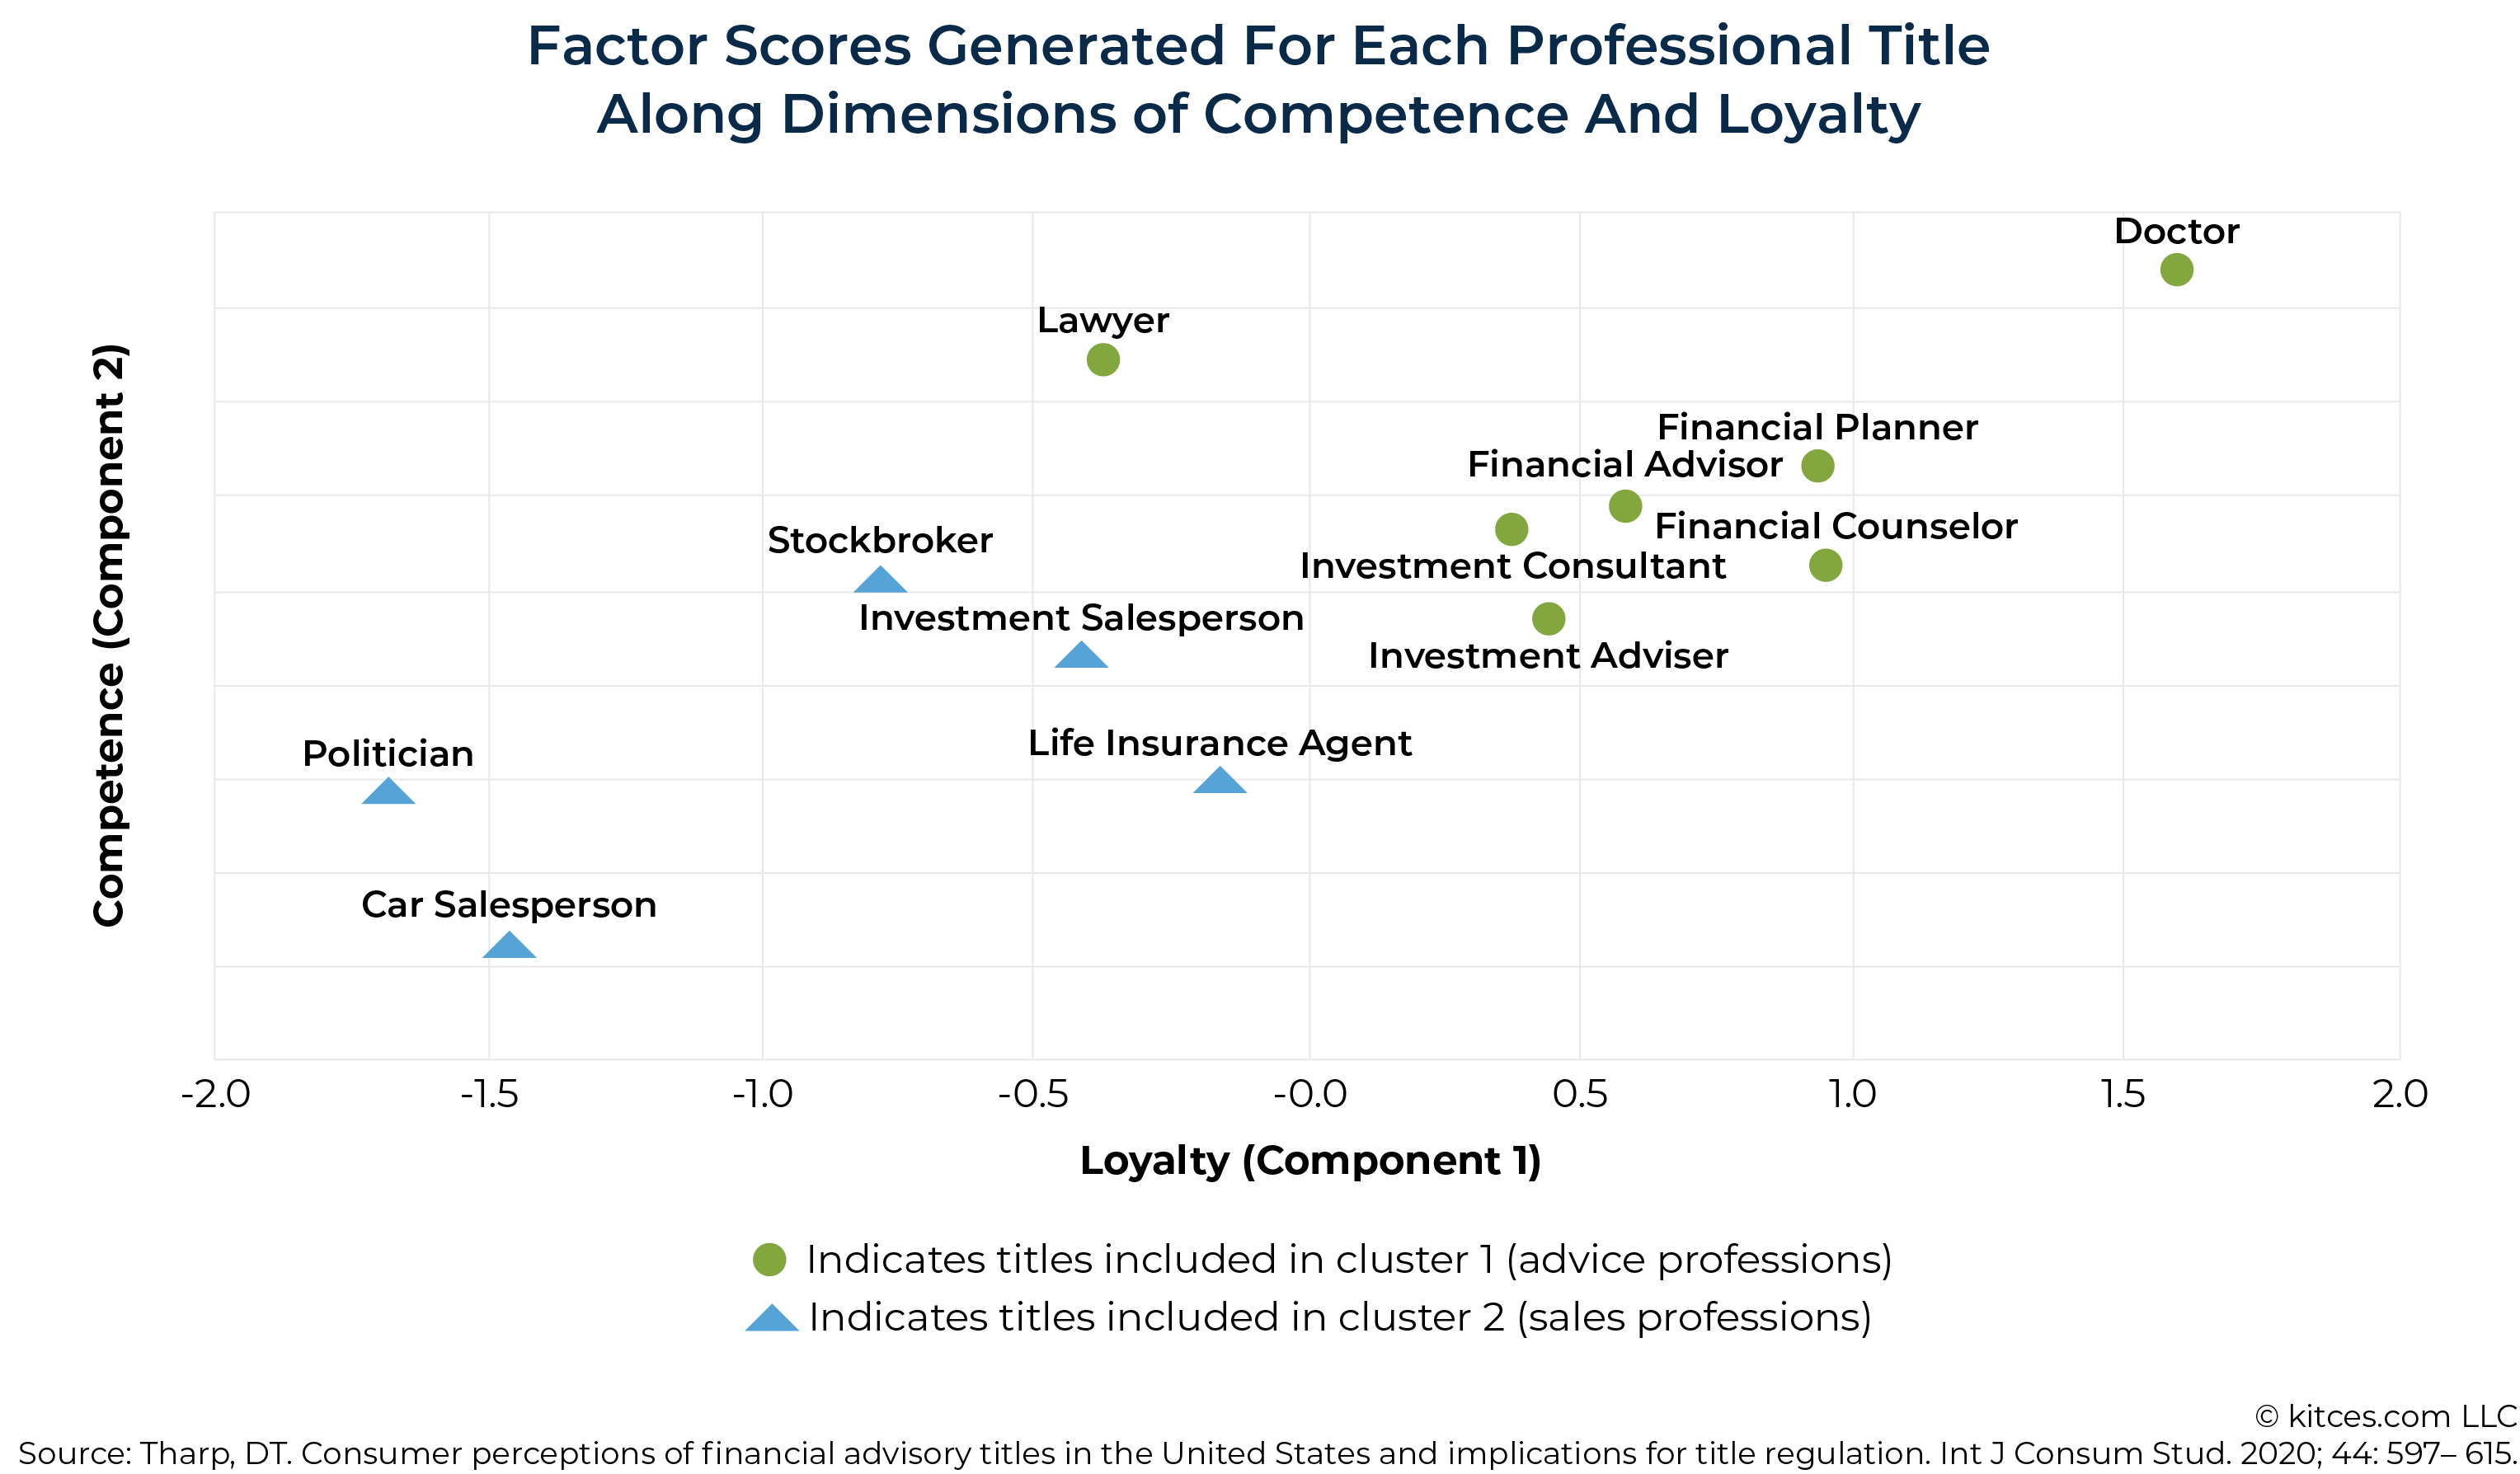 Factor Scores Generated For Each Professional Title Along Dimensions of Competence And Loyalty